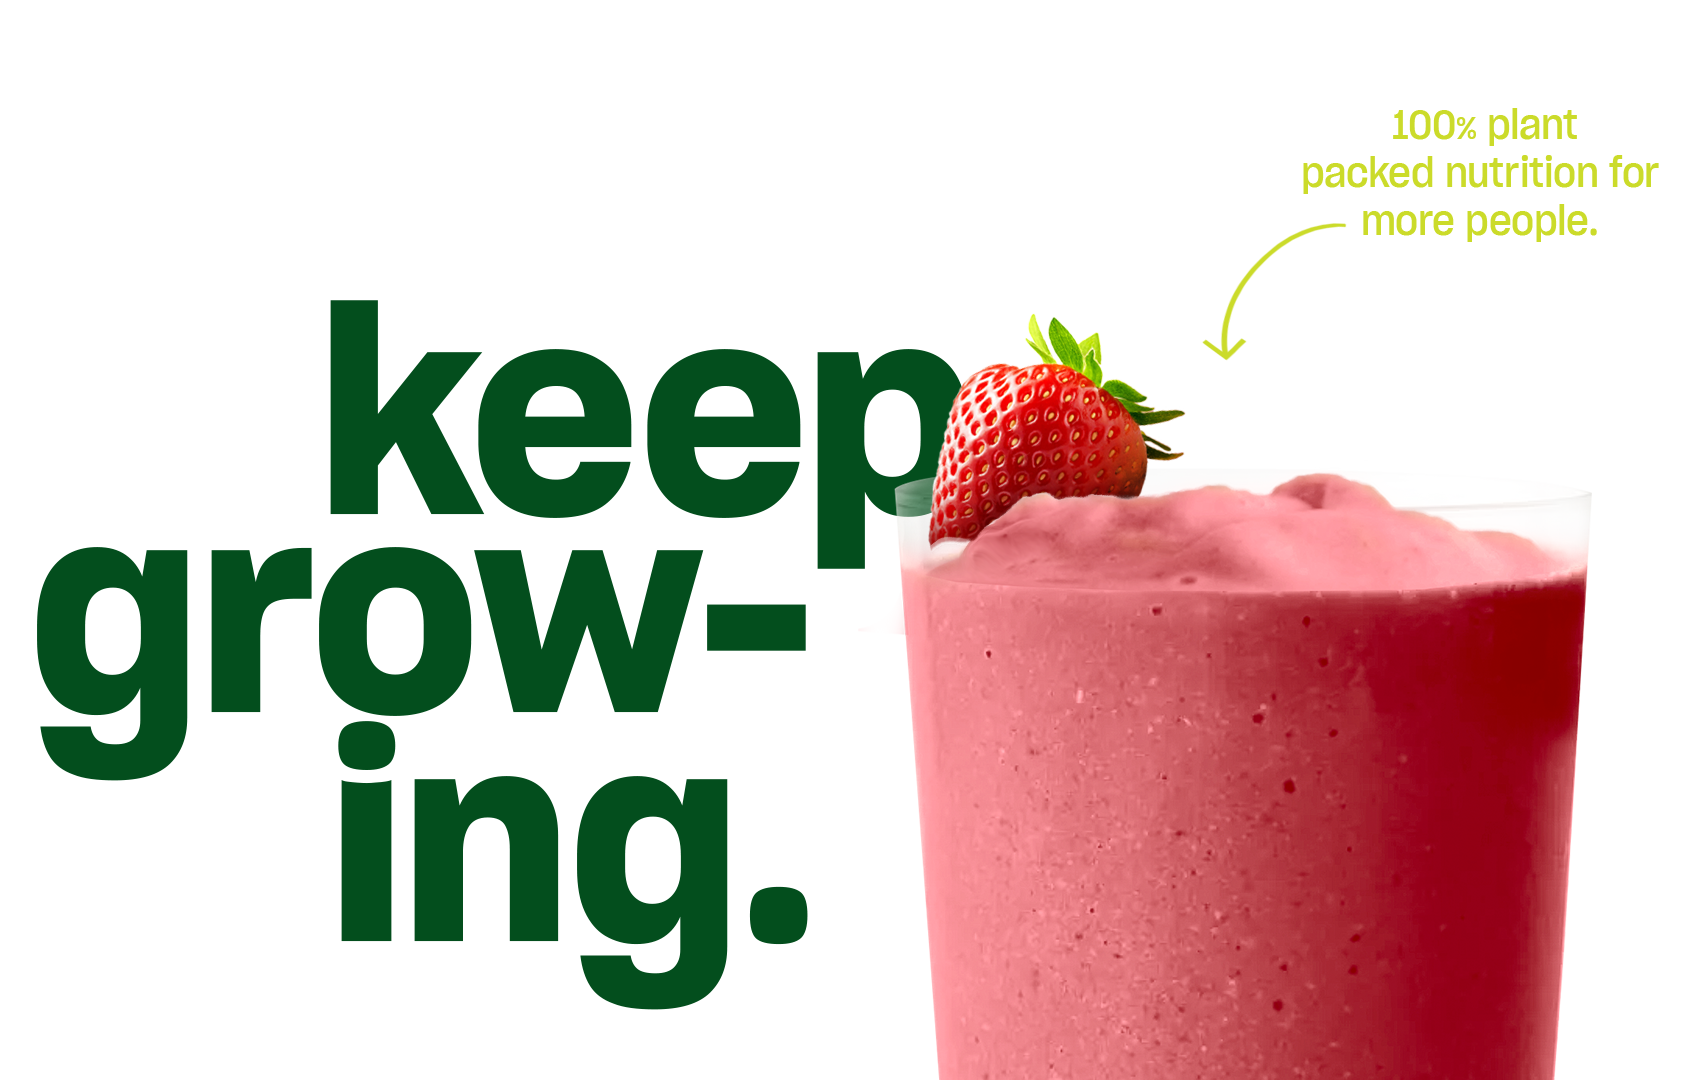 Vega Keep growing - 100% plant nutrition for more people